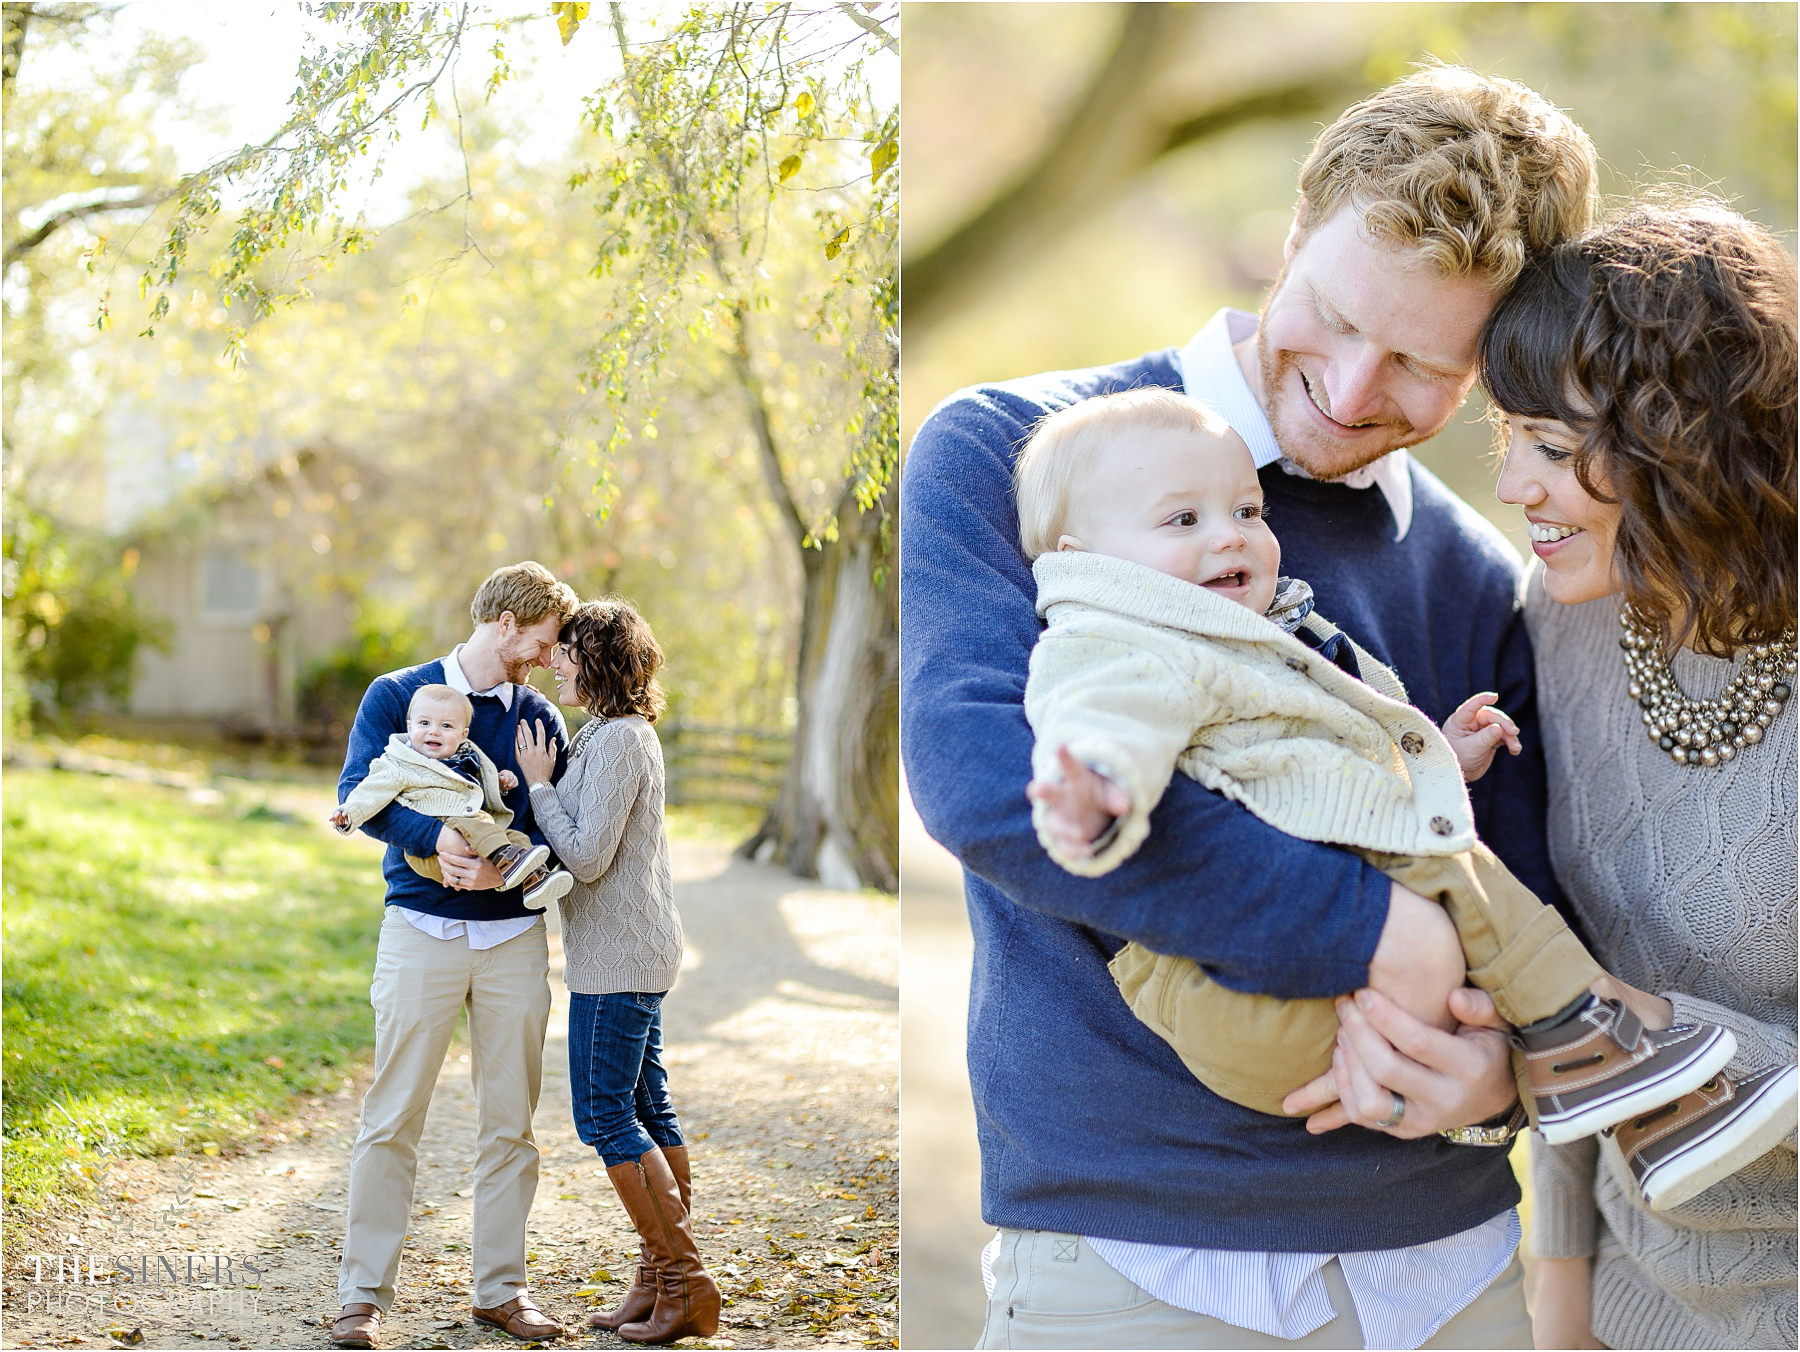 Mahoney Family_Indianapolis Family Photographer_TheSinersPhotography_0010